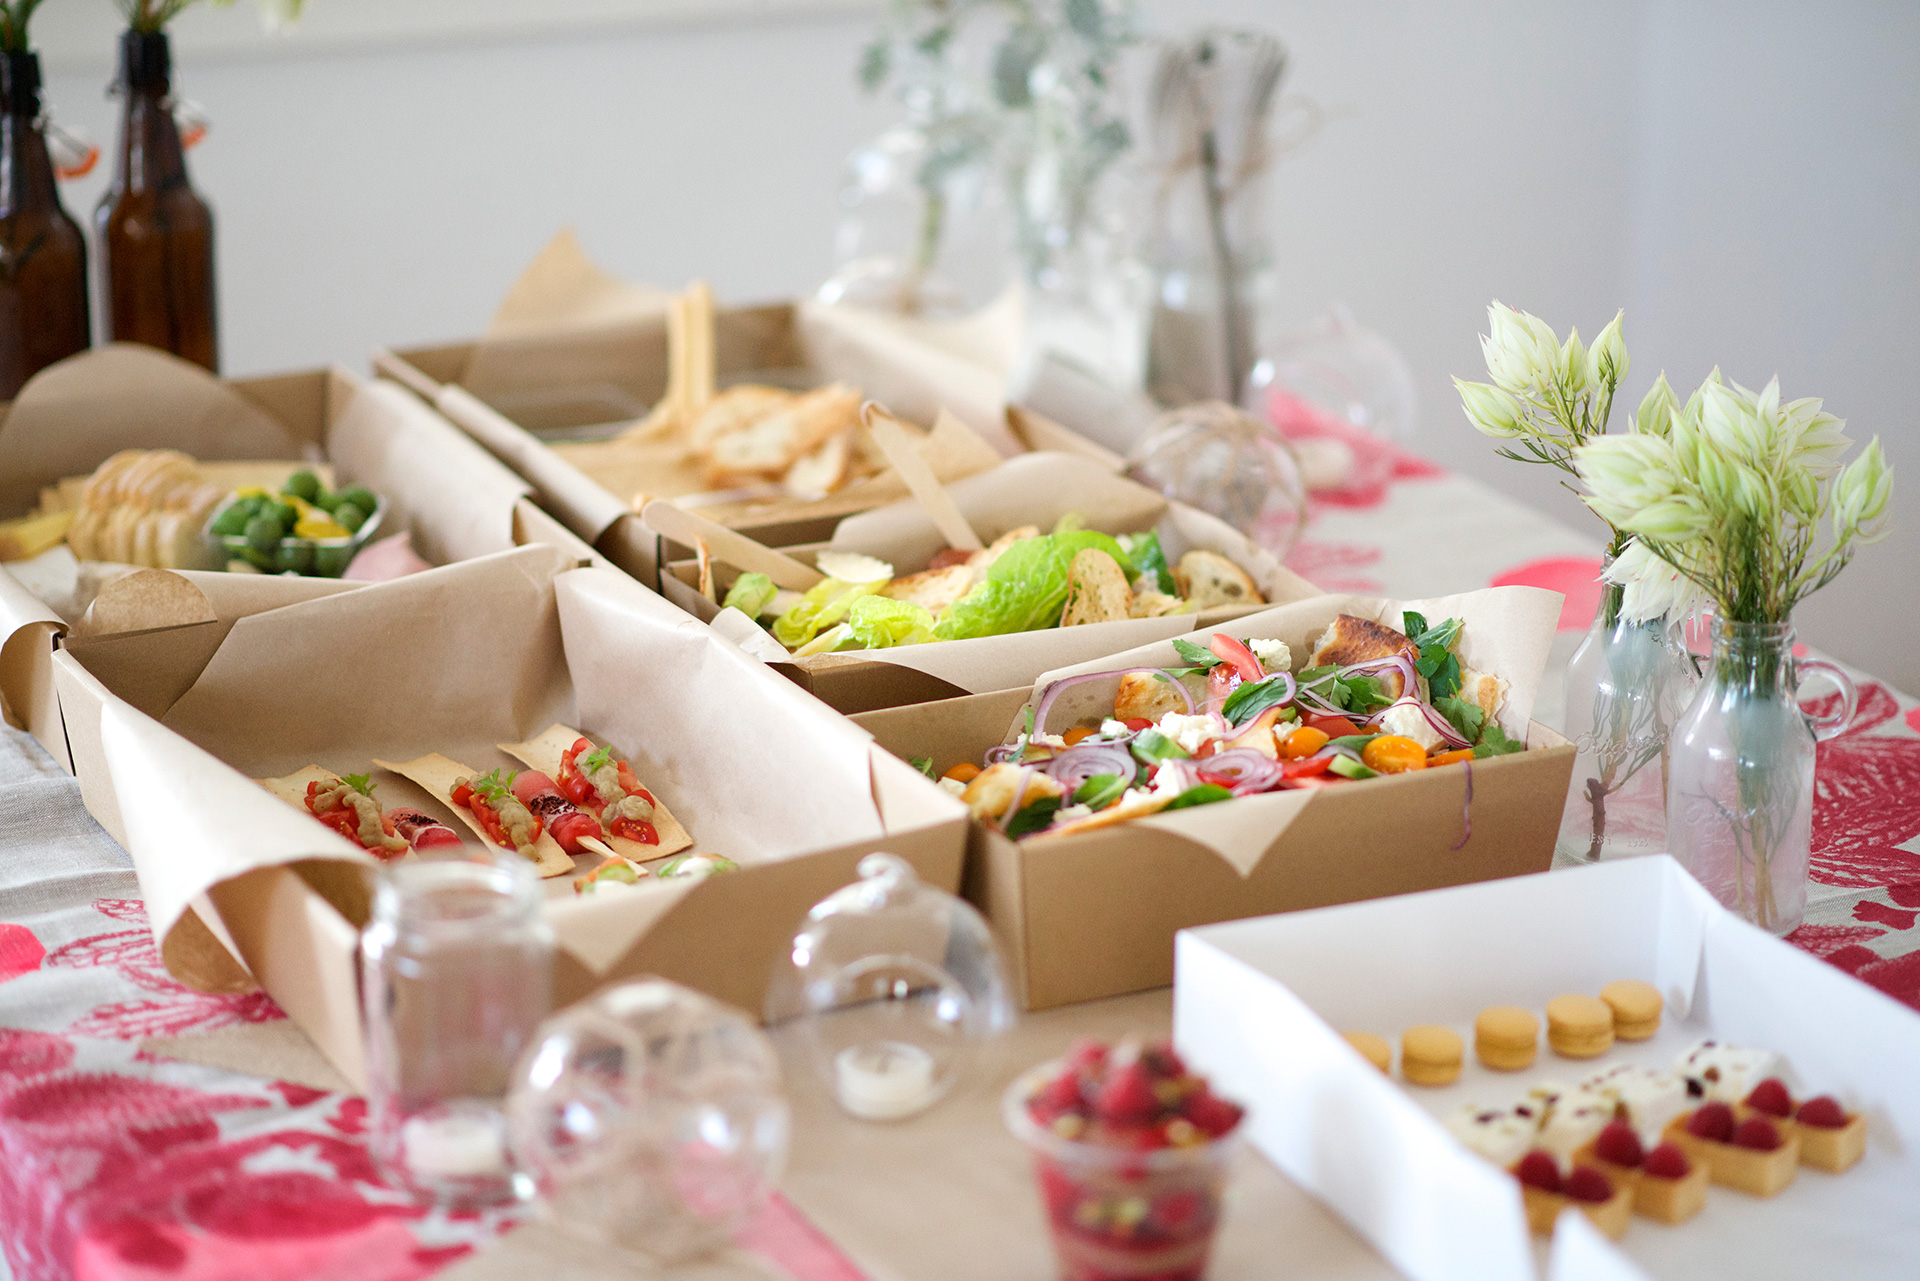 The Dropp gourmet food catering in Sydney